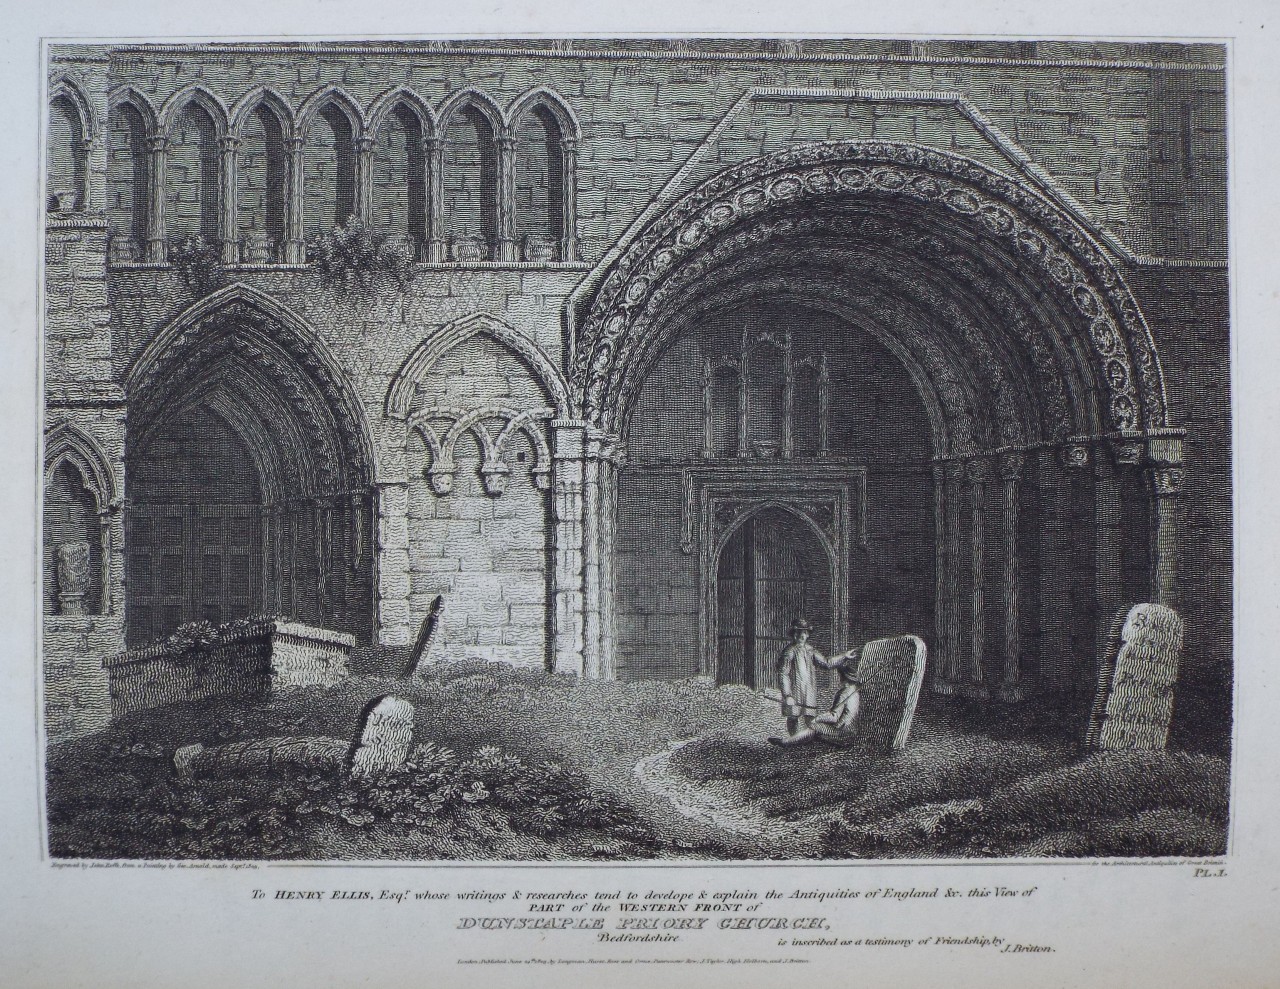 Print - Part of the Western Front of Dunstaple Priory Church, Bedfordshire. - Roffe